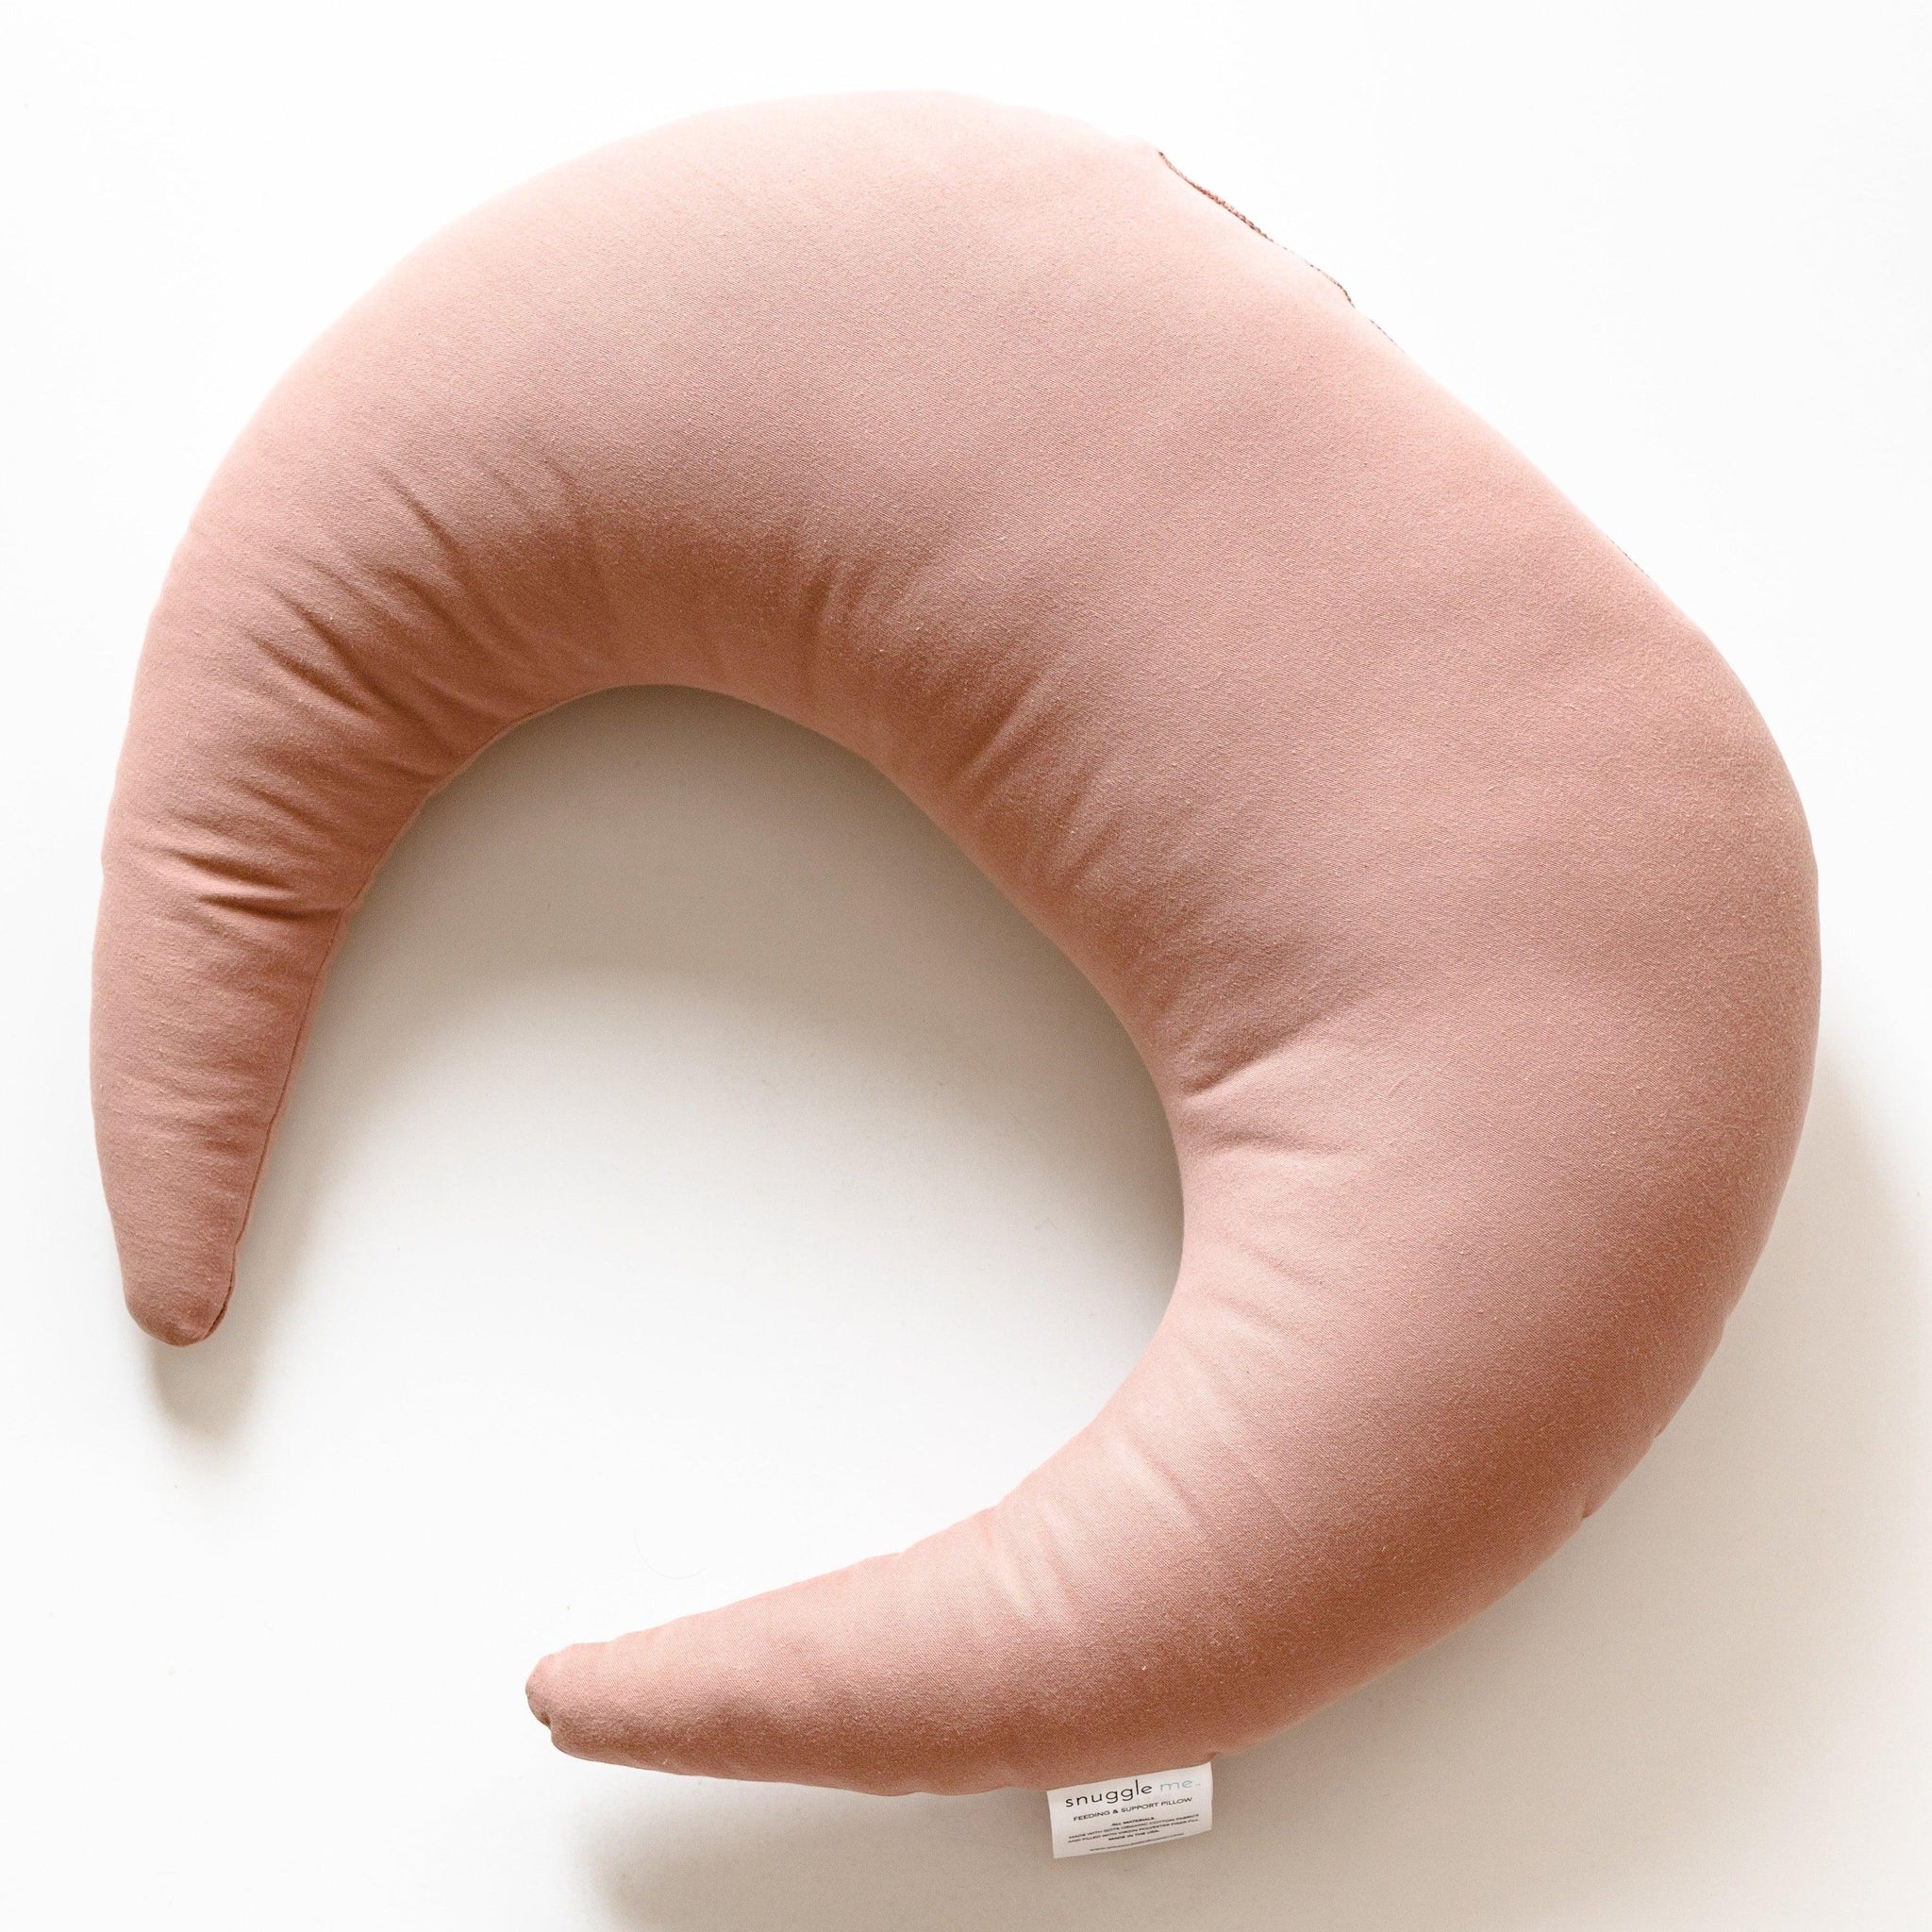 A crescent-shaped Feeding & Support Pillow by Snuggle Me in the shade Gumdrop on a white surface.